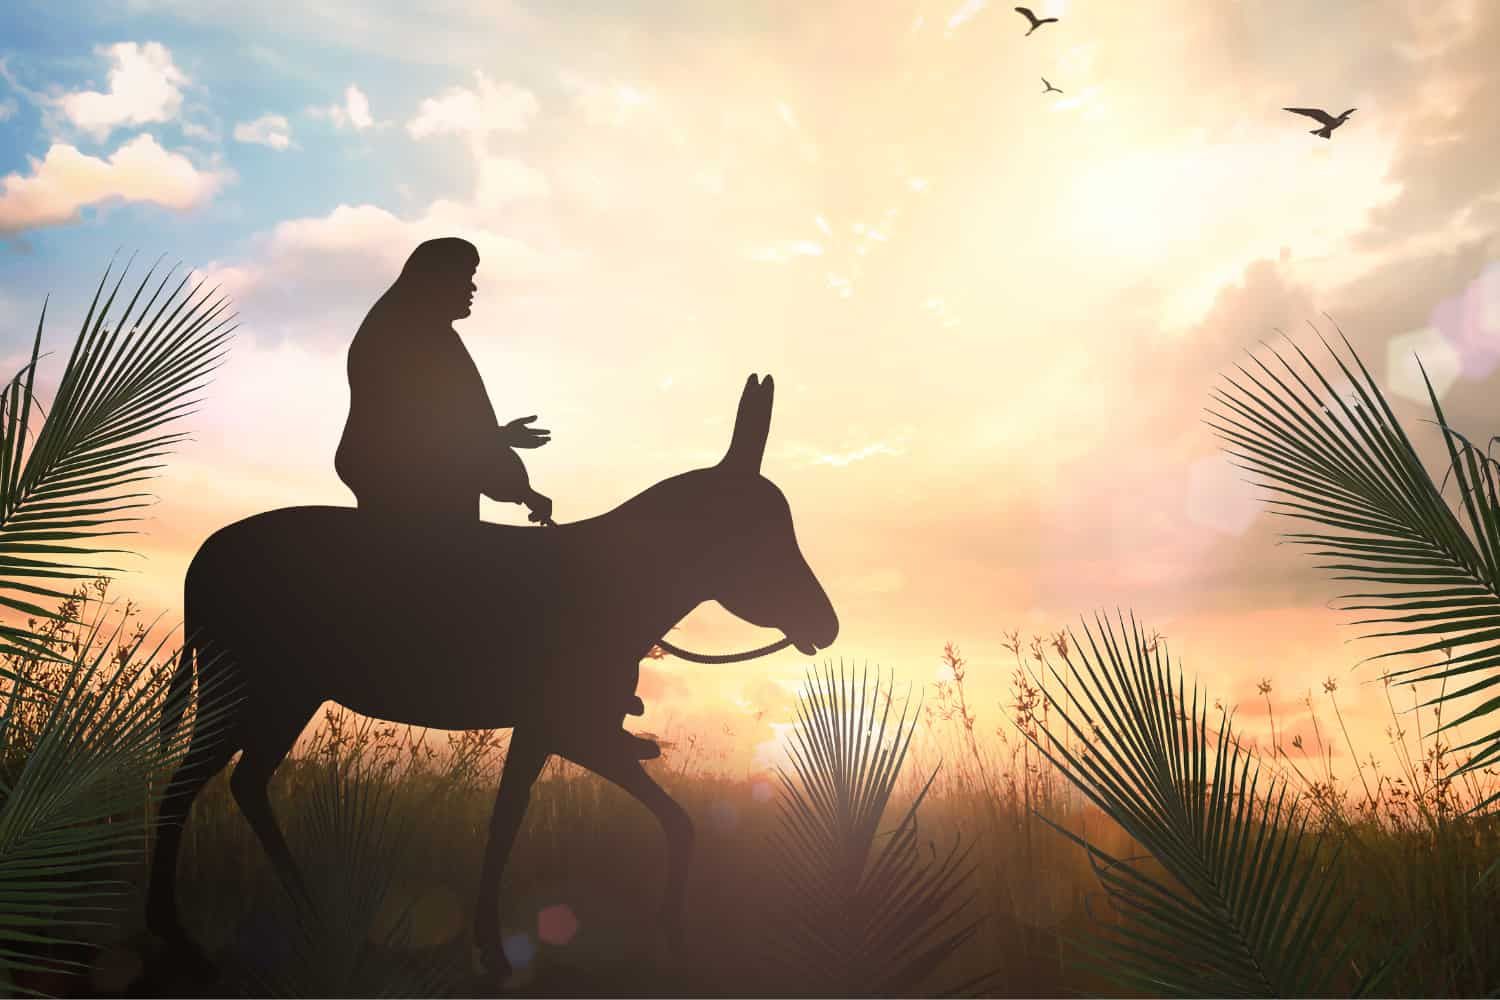 Lesson%20-%20NT%20Easter%2002%20-%20Palm%20Sunday%202%20Humble%20on%20a%20donkey-c3dfbb64 Lessons